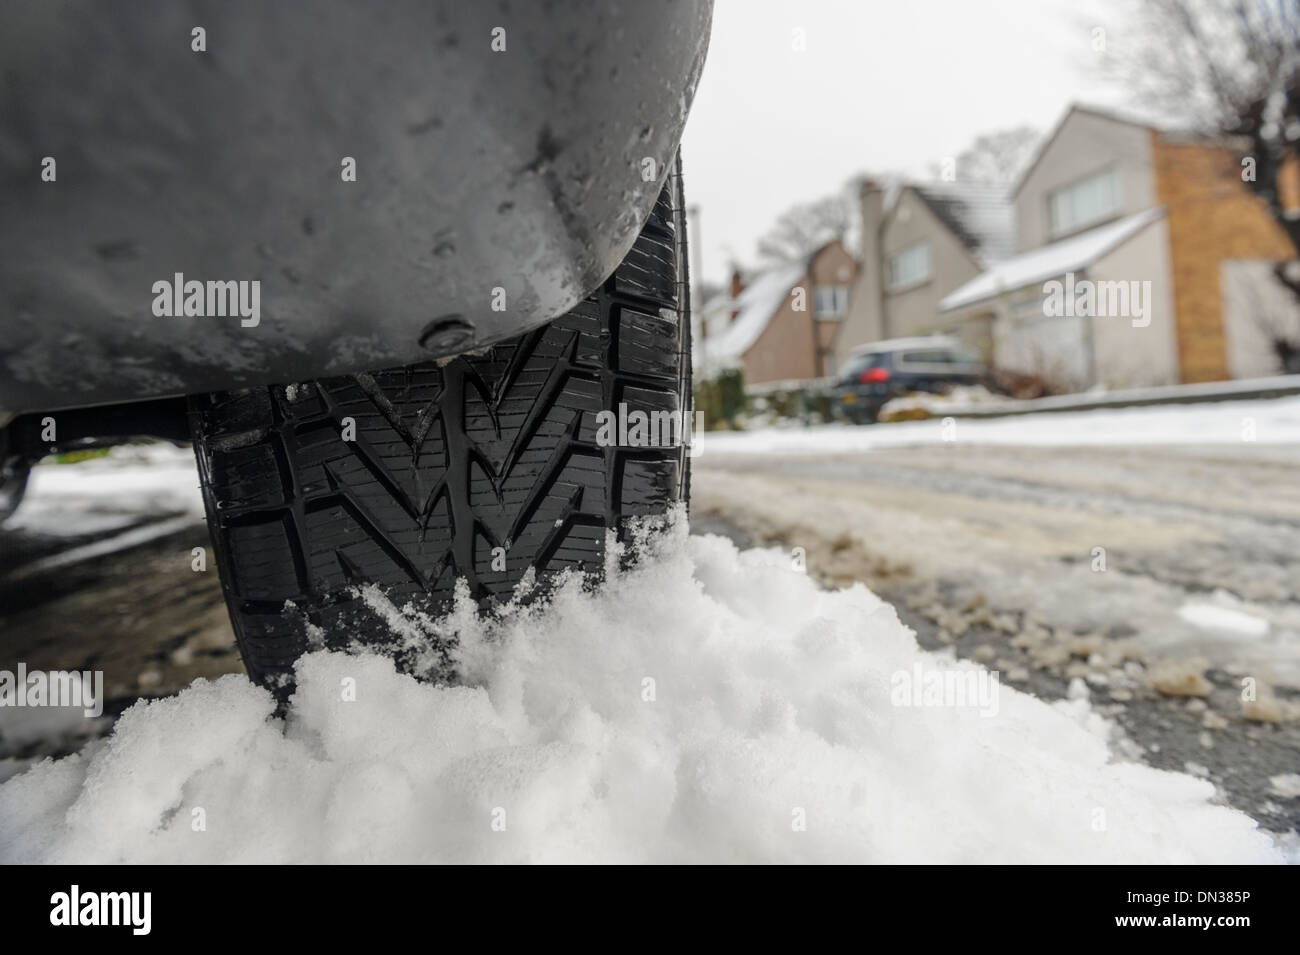 United Kingdom, winter tyre tread on car with snow in background Stock Photo